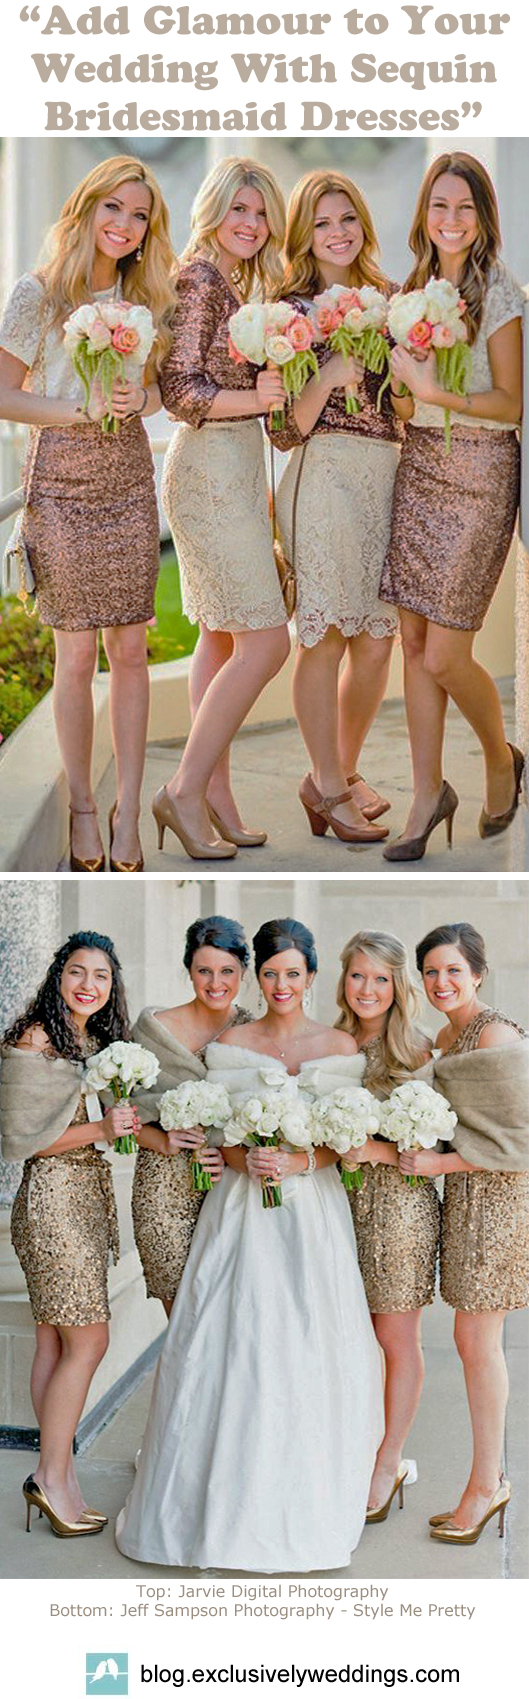 Tailored Bridesmaid Dresses with Sequins